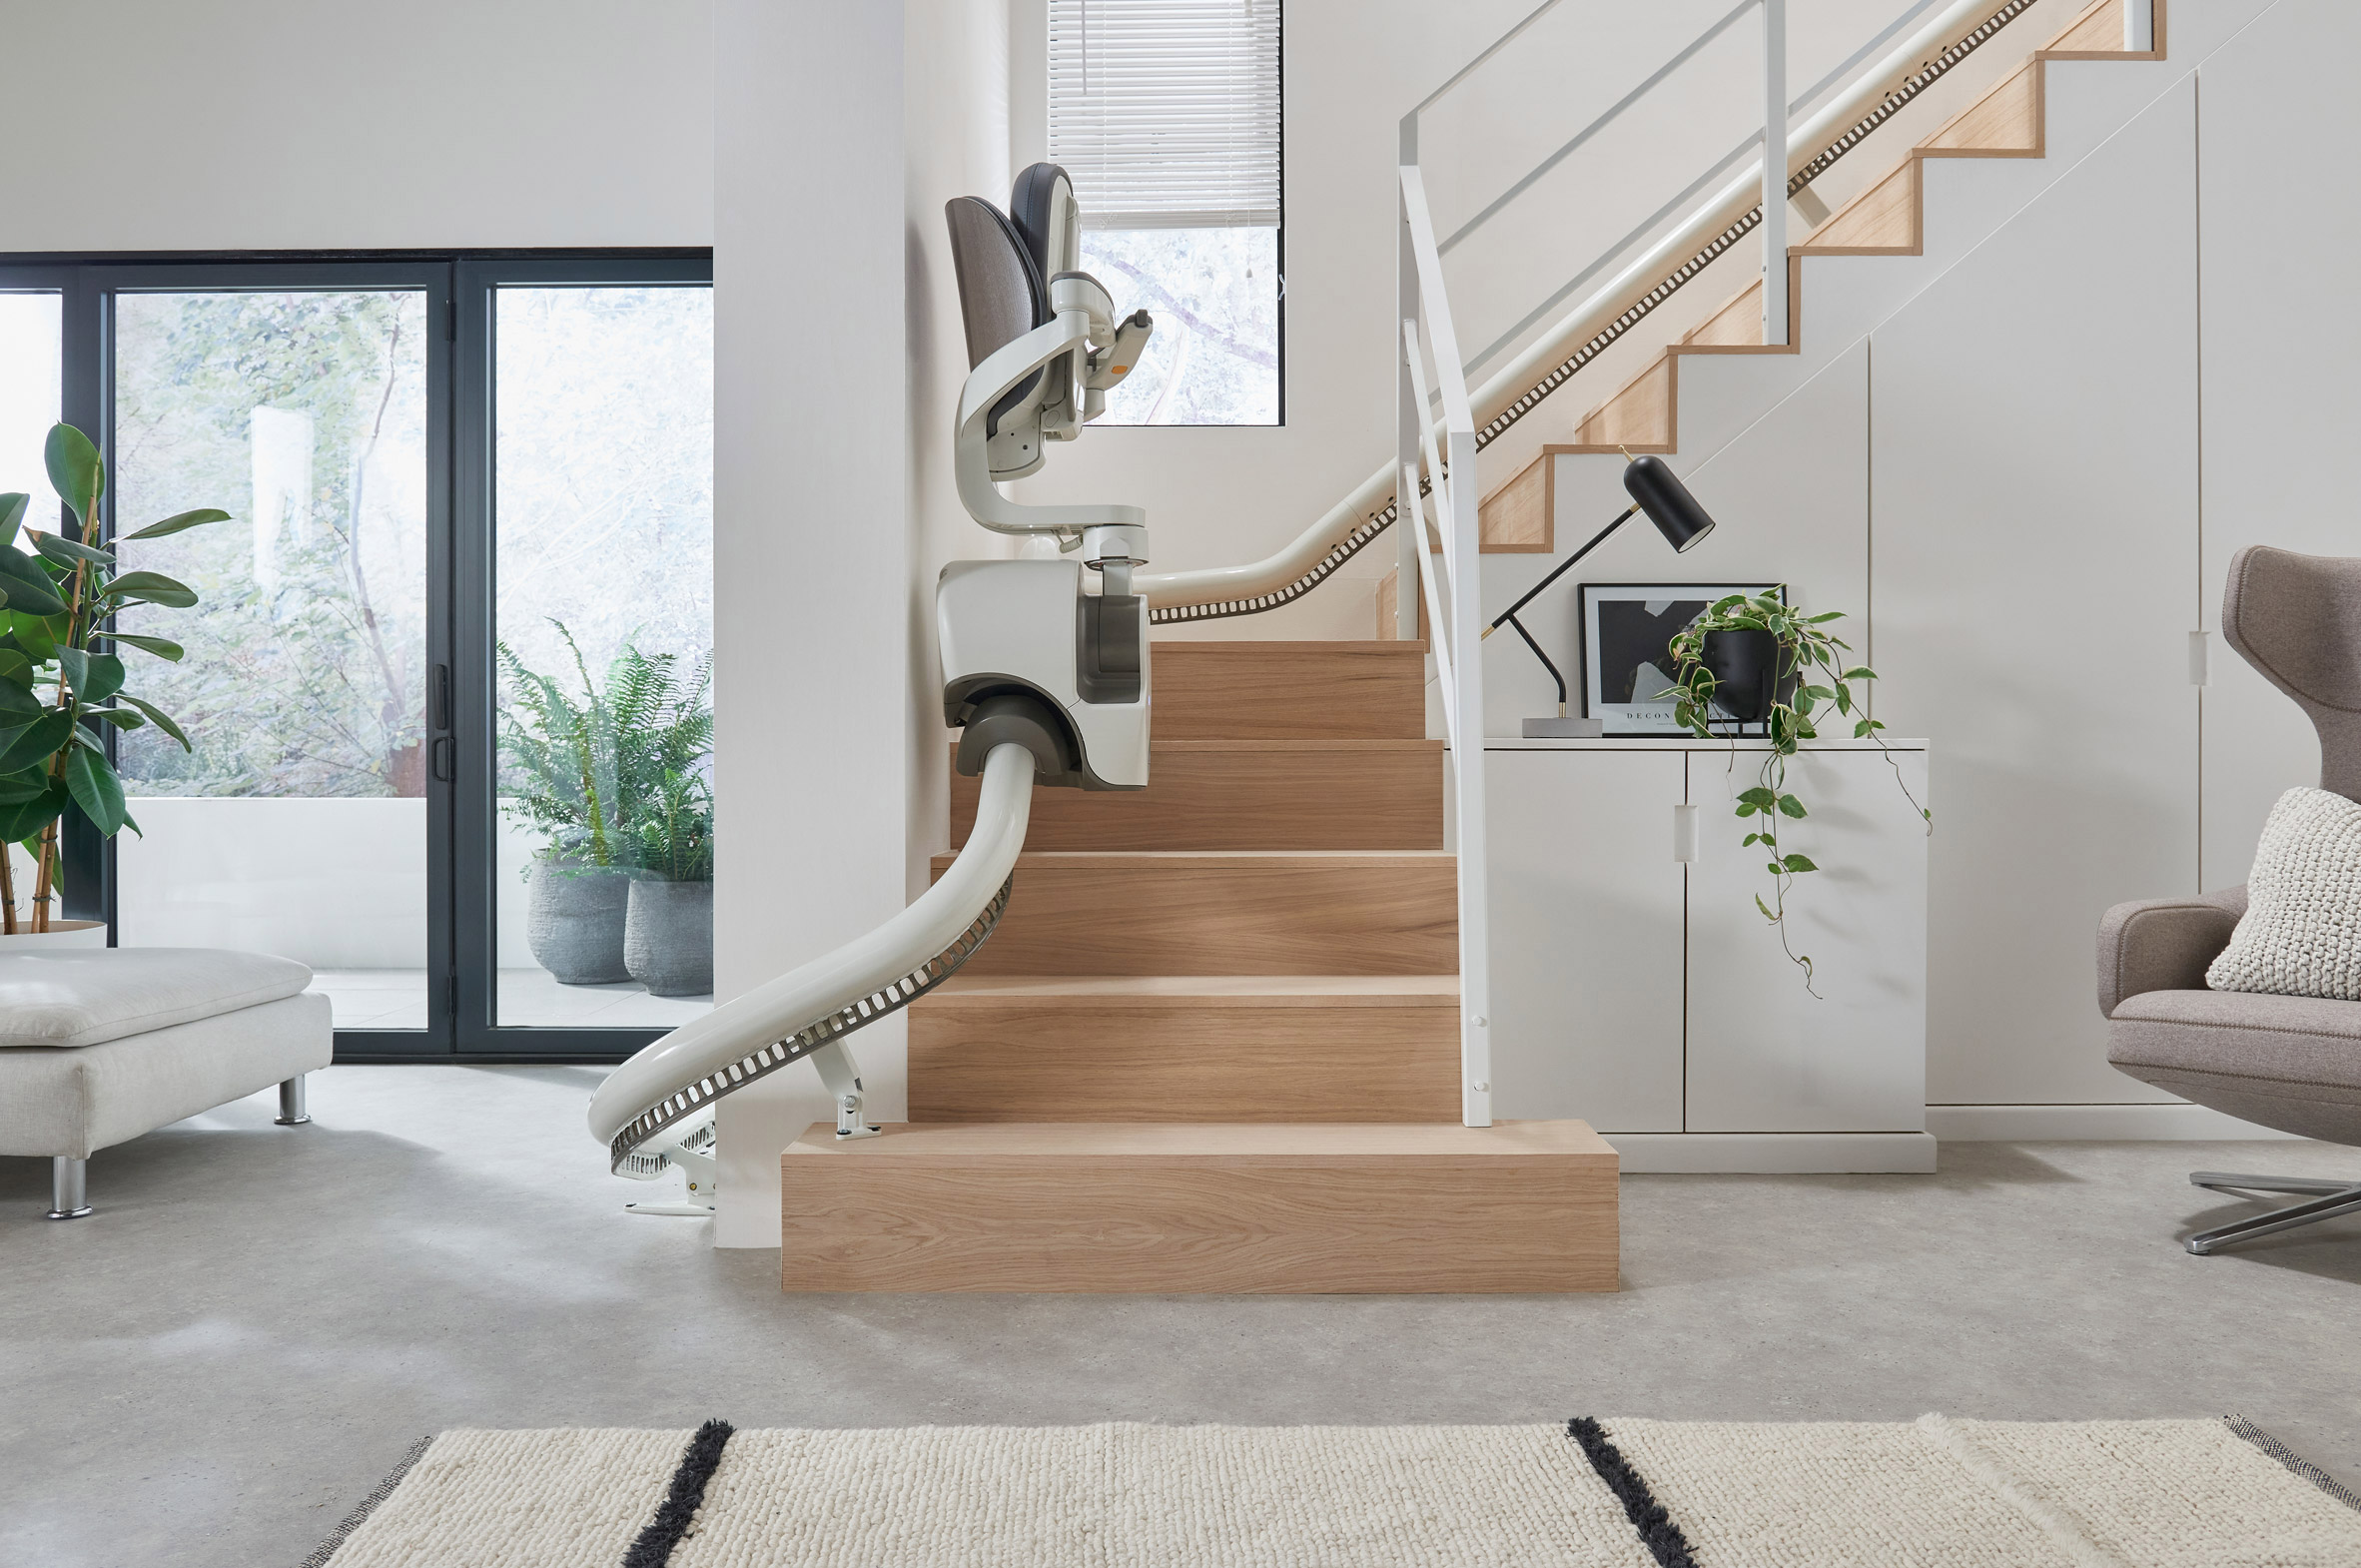 Flow X stairlift installed in a contemporary residential interior